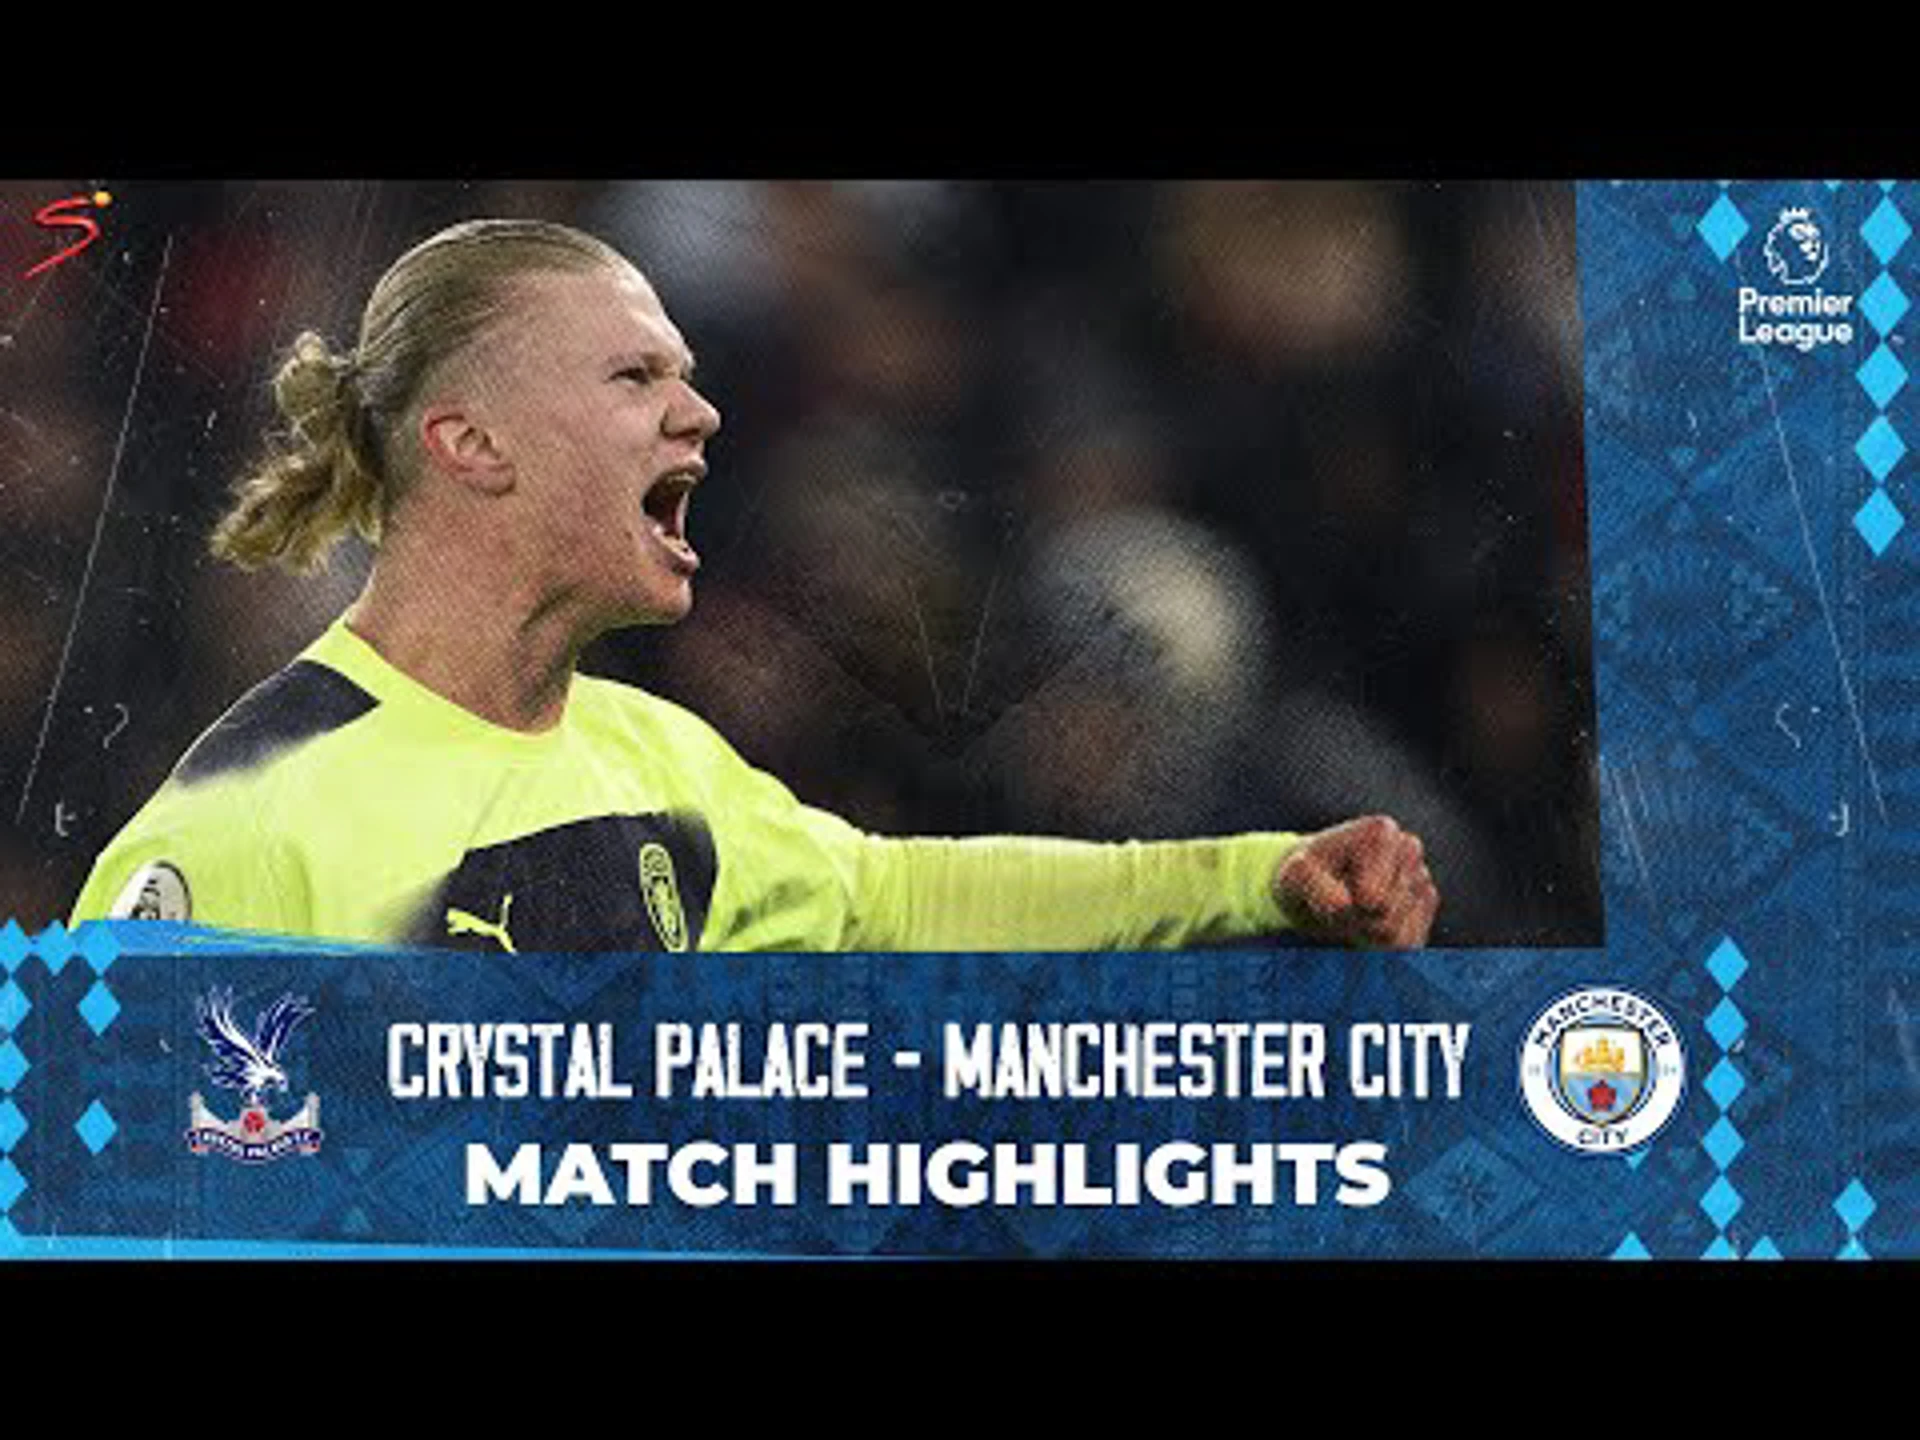 Premier League | Crystal Palace v Manchester City | Match in 3 minutes